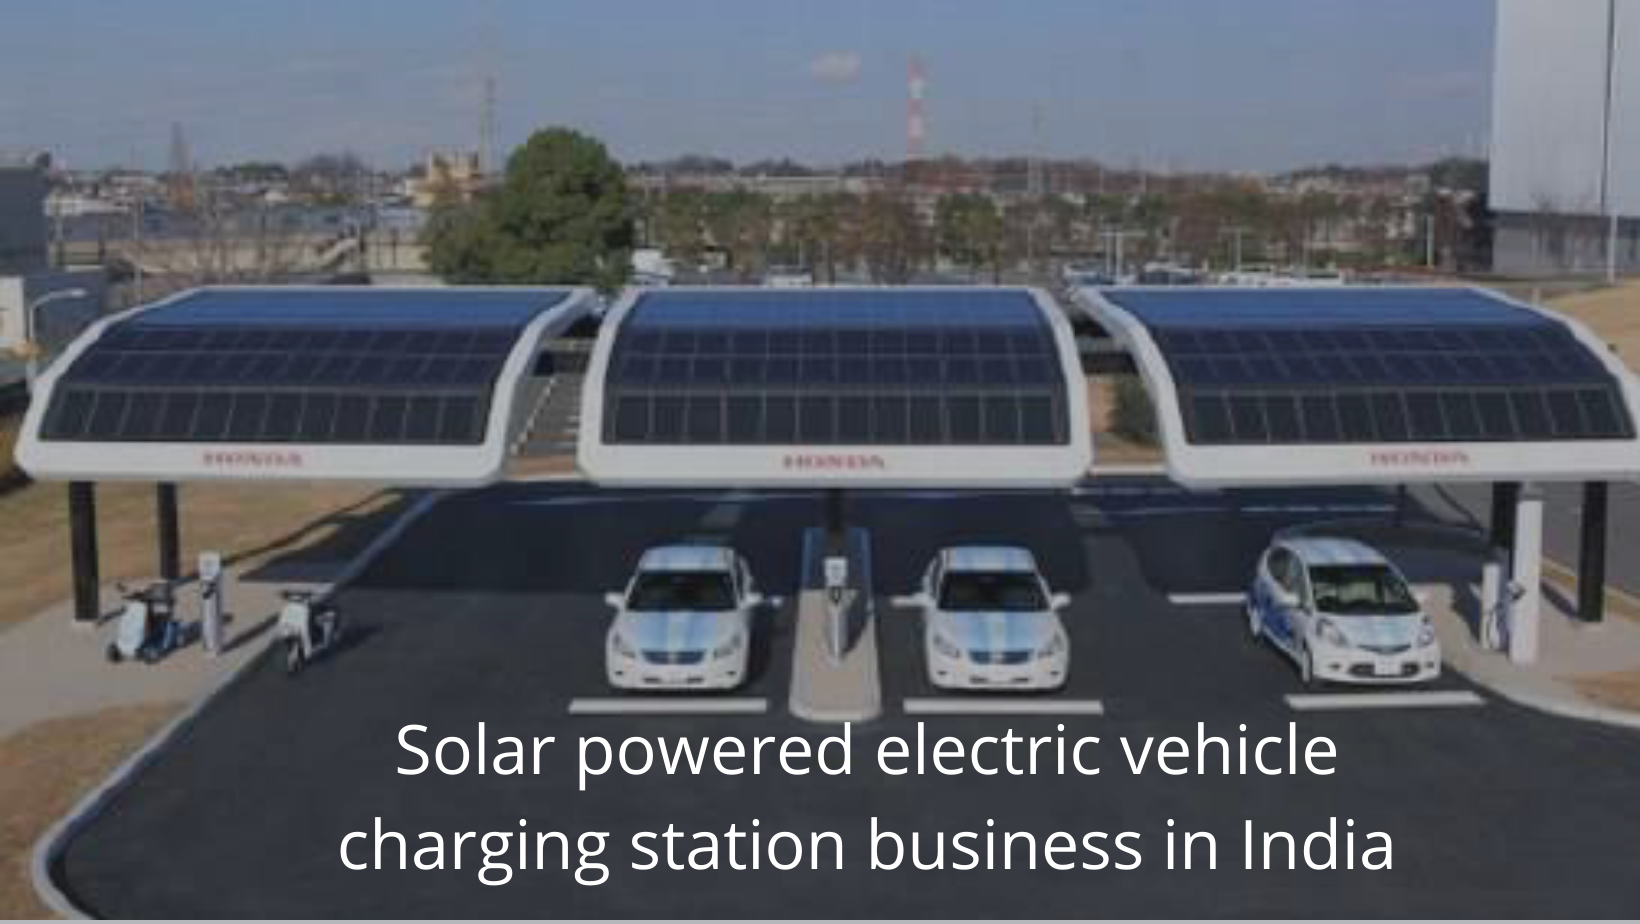 solar powered electric vehicle research paper